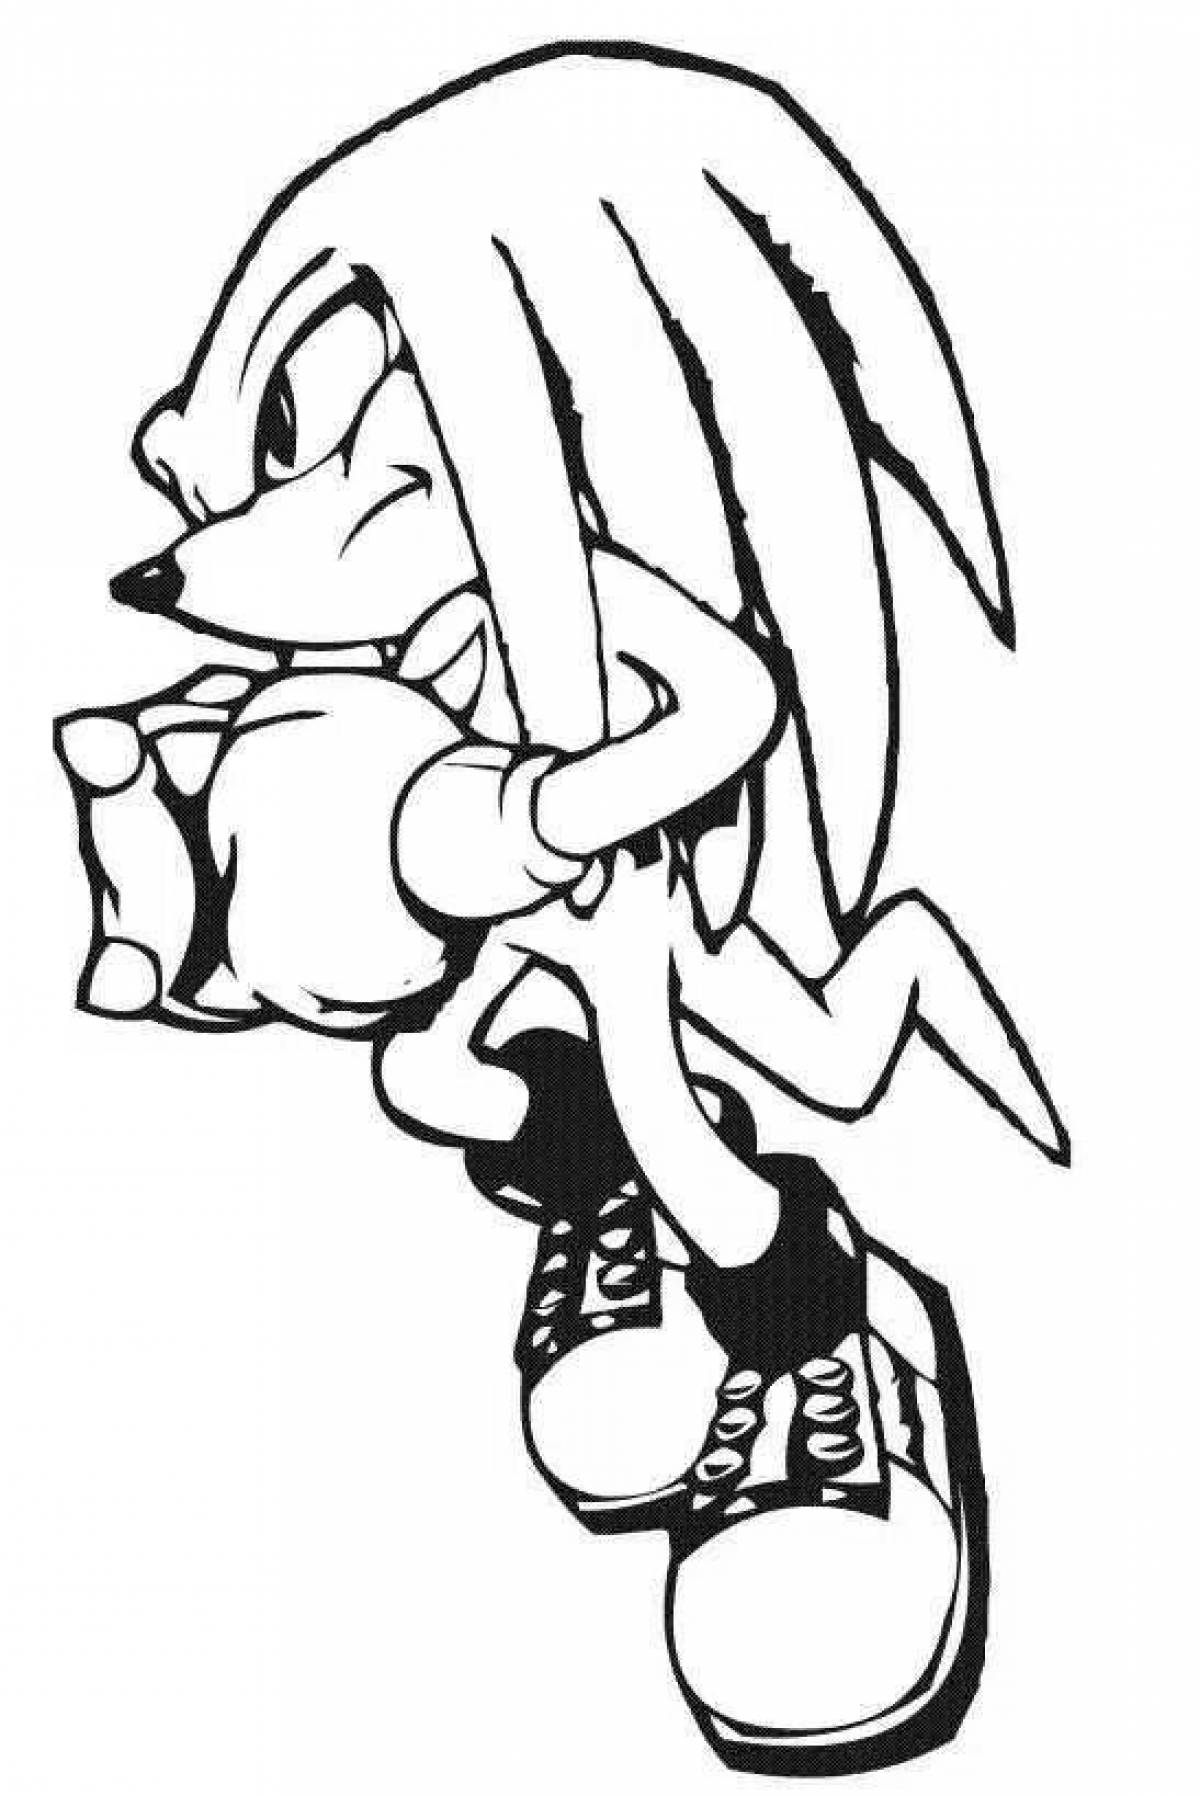 Charming sonic knuckles coloring book